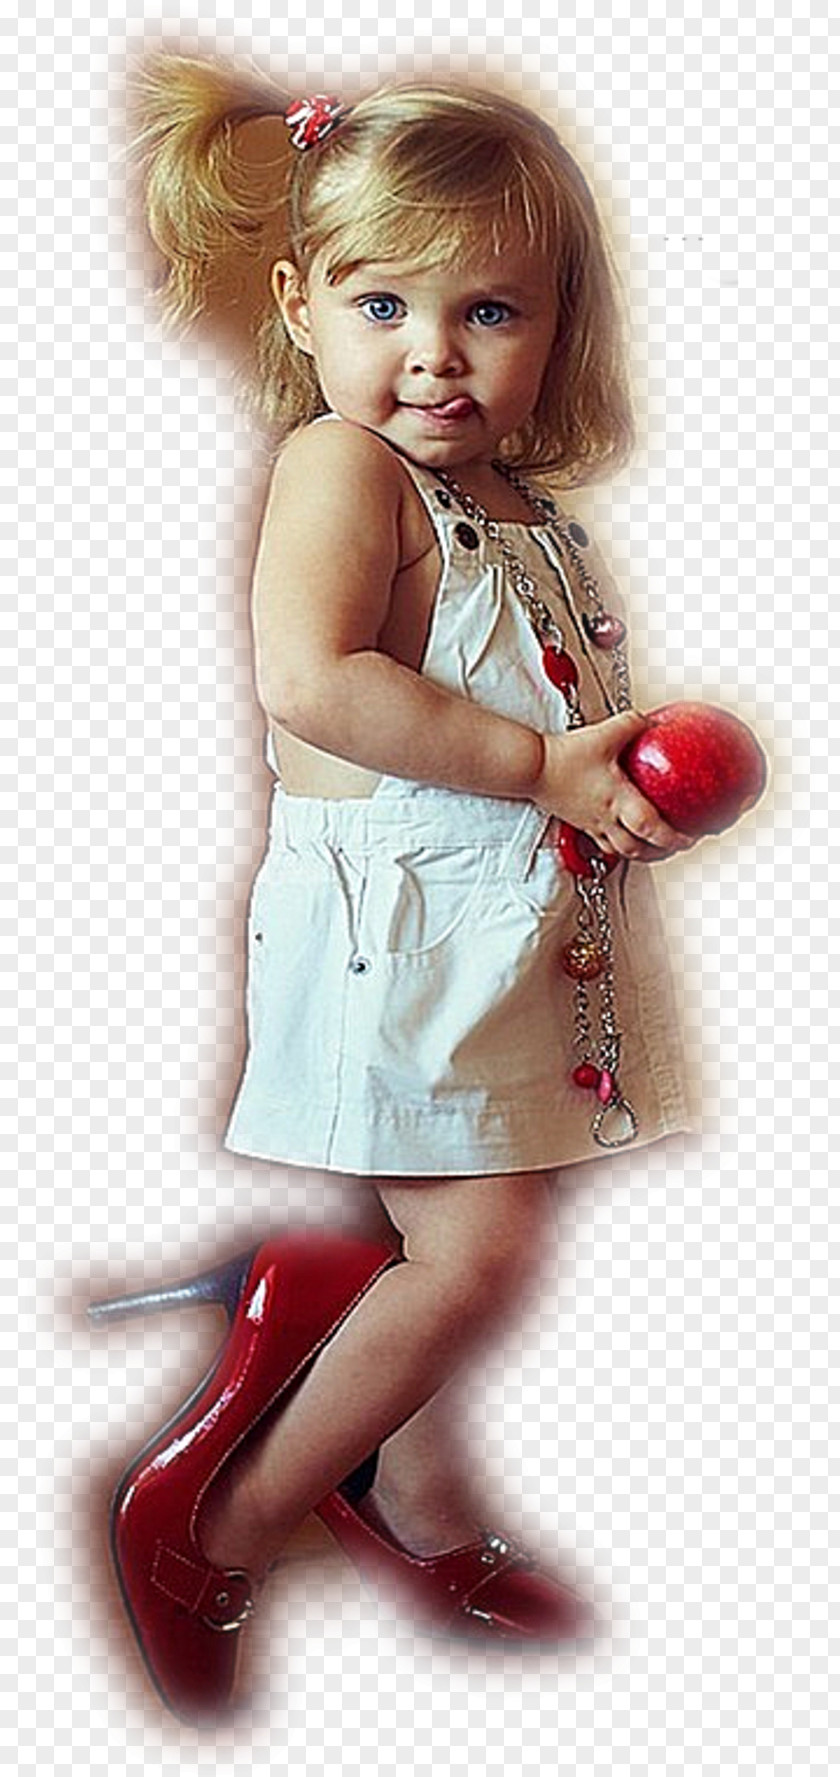 Child Photography Idea PNG